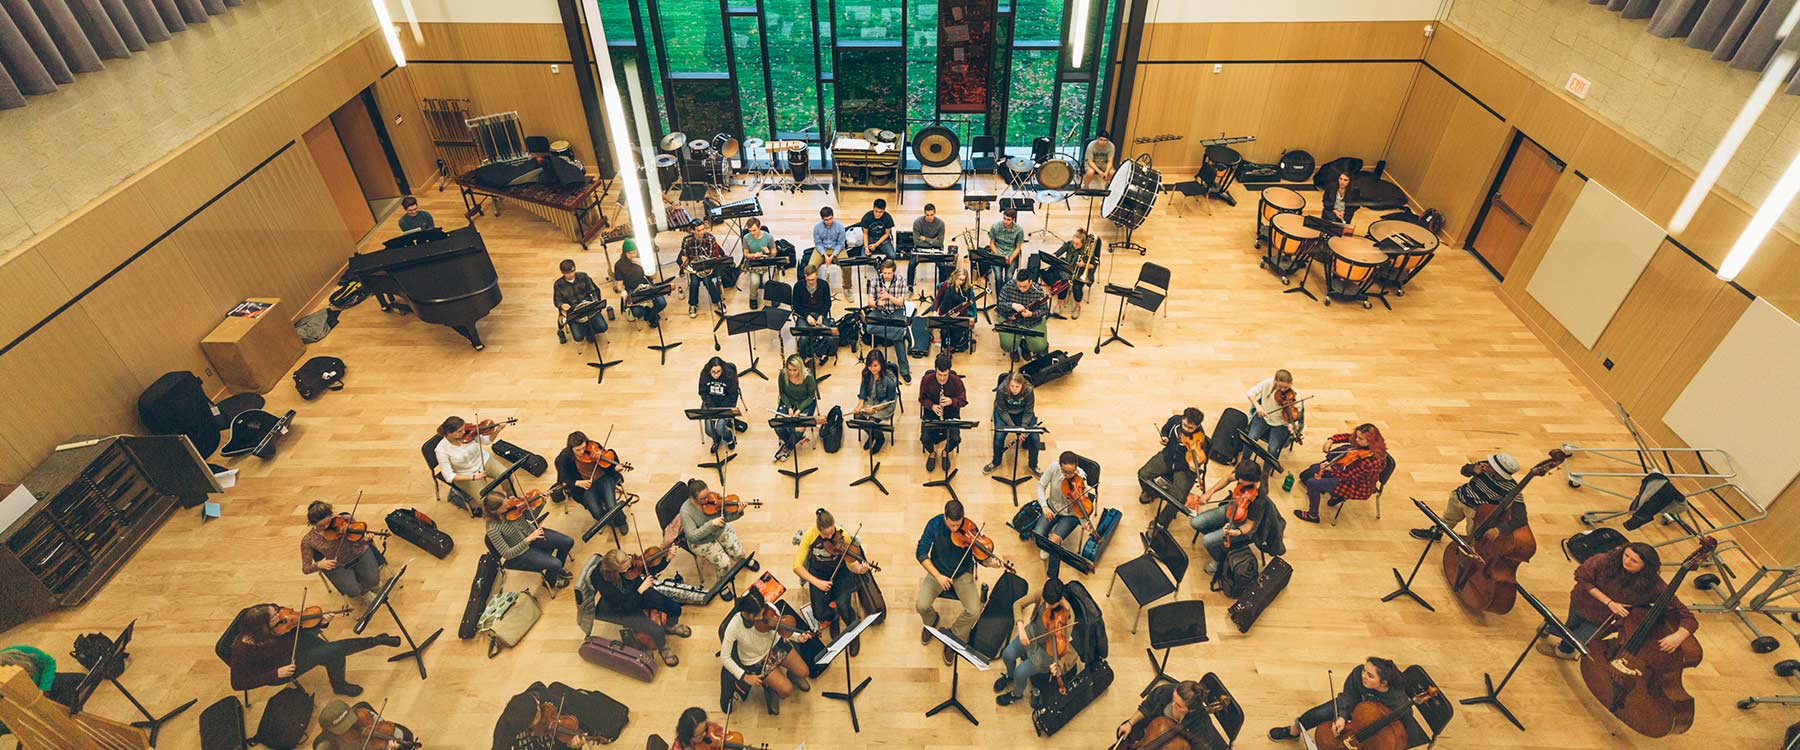 A view from the ceiling looking down at symphony students rehearsing in Cowles Music Center.